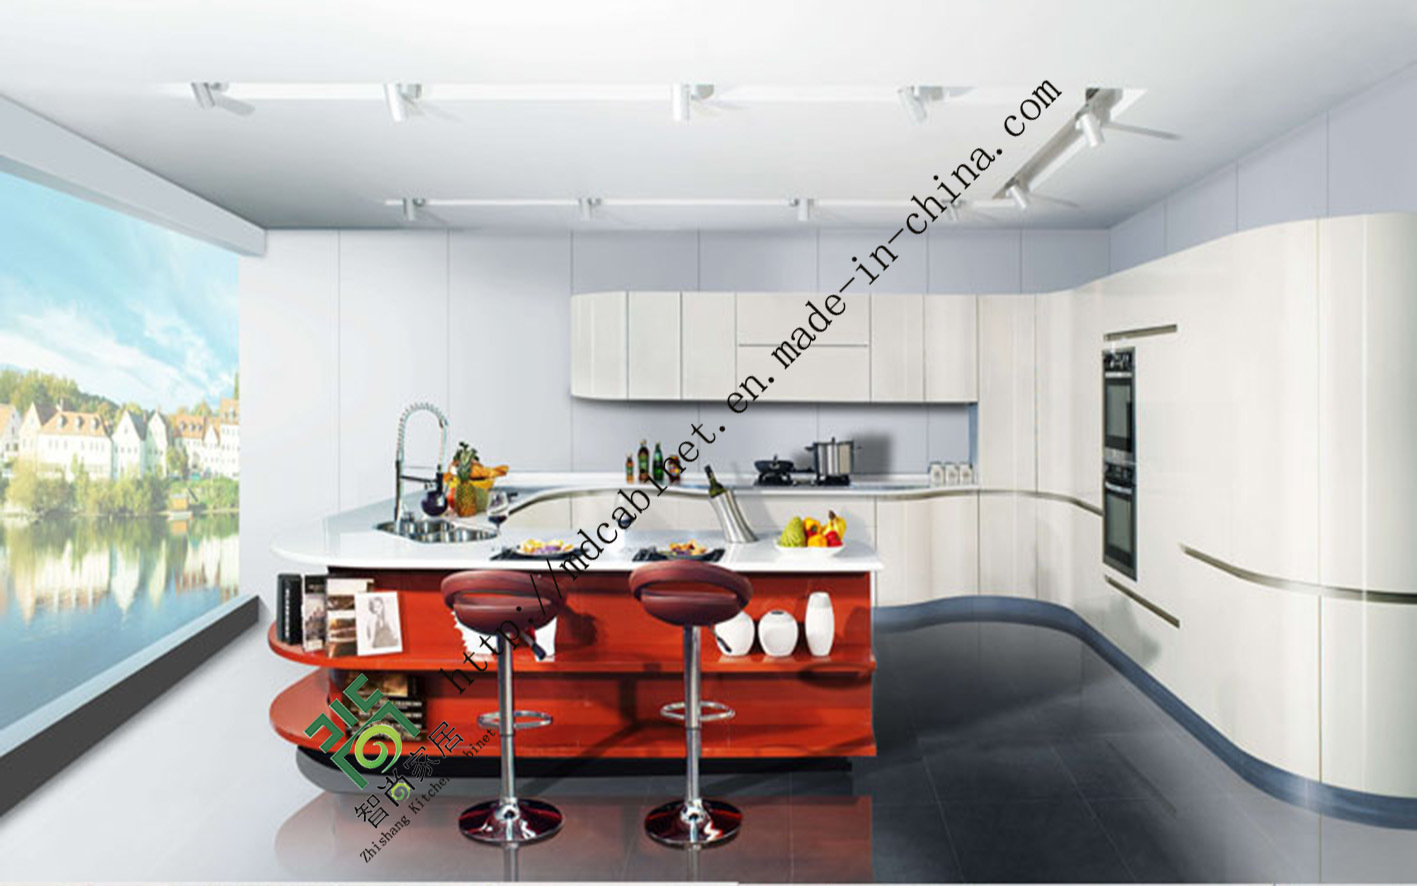 High Quality Yellow Lacquer Kitchen Cabinets (zs-213)